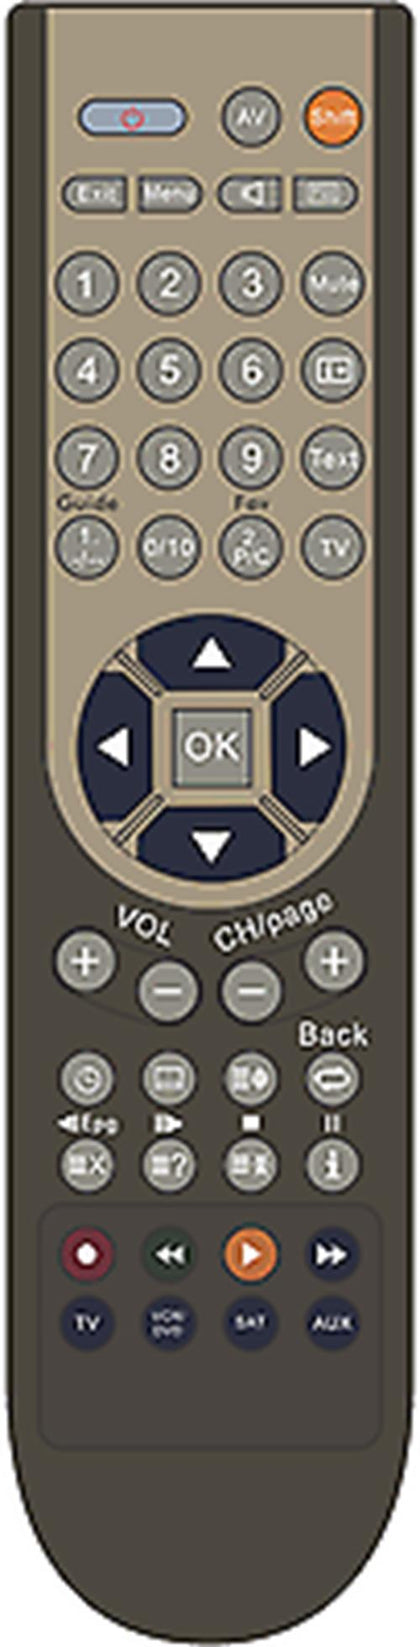 Replacement Remote Control for Humax RM-109U